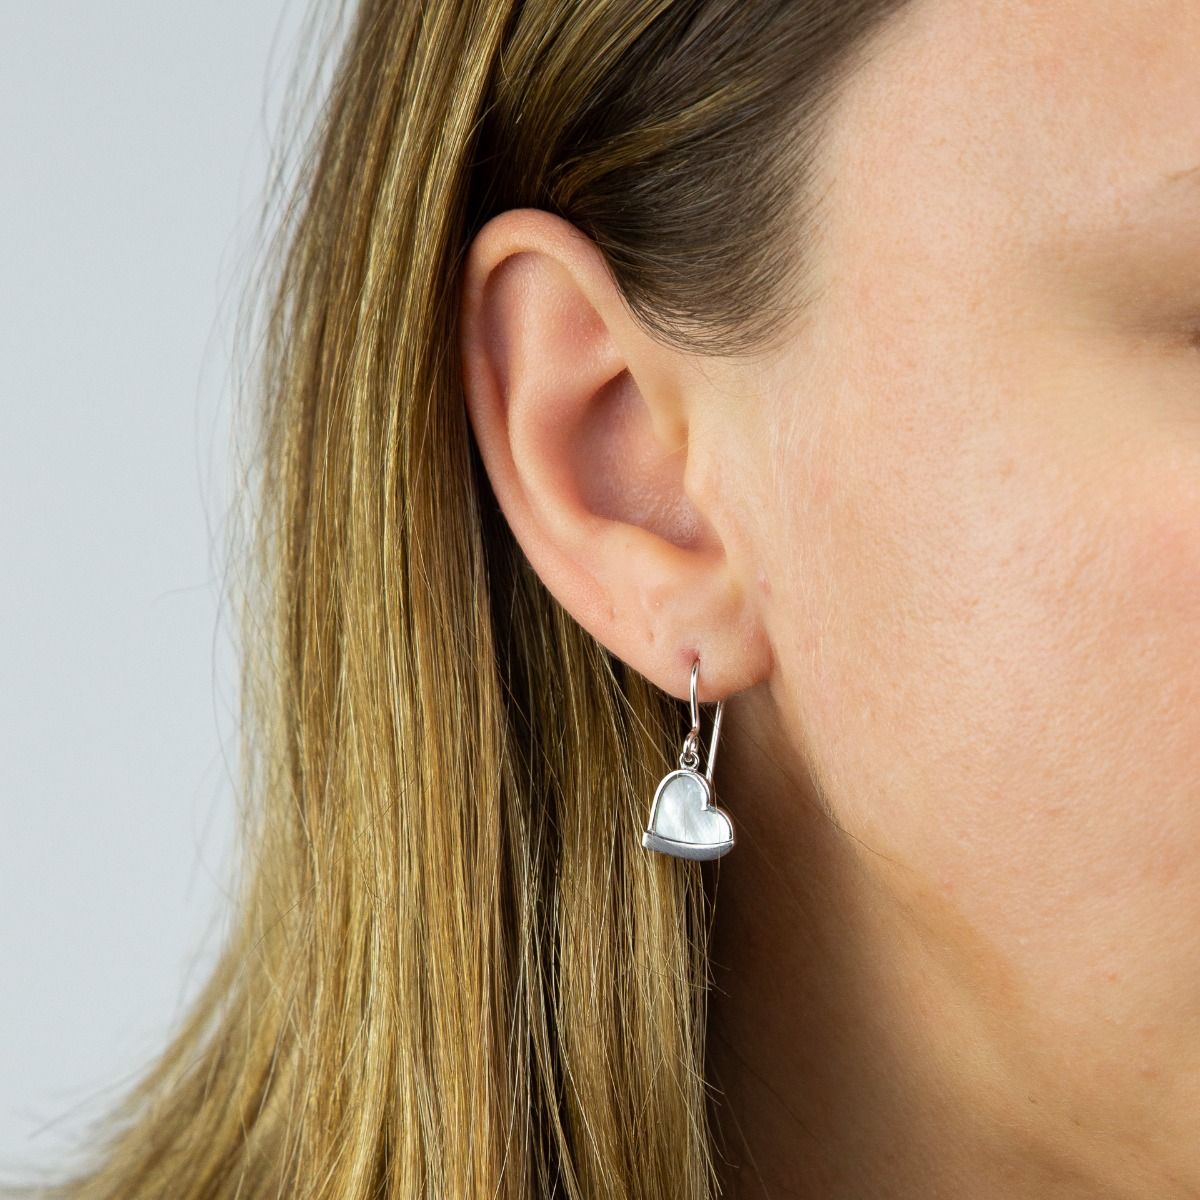 Heart Drop Earrings with Mother of Pearl Centre